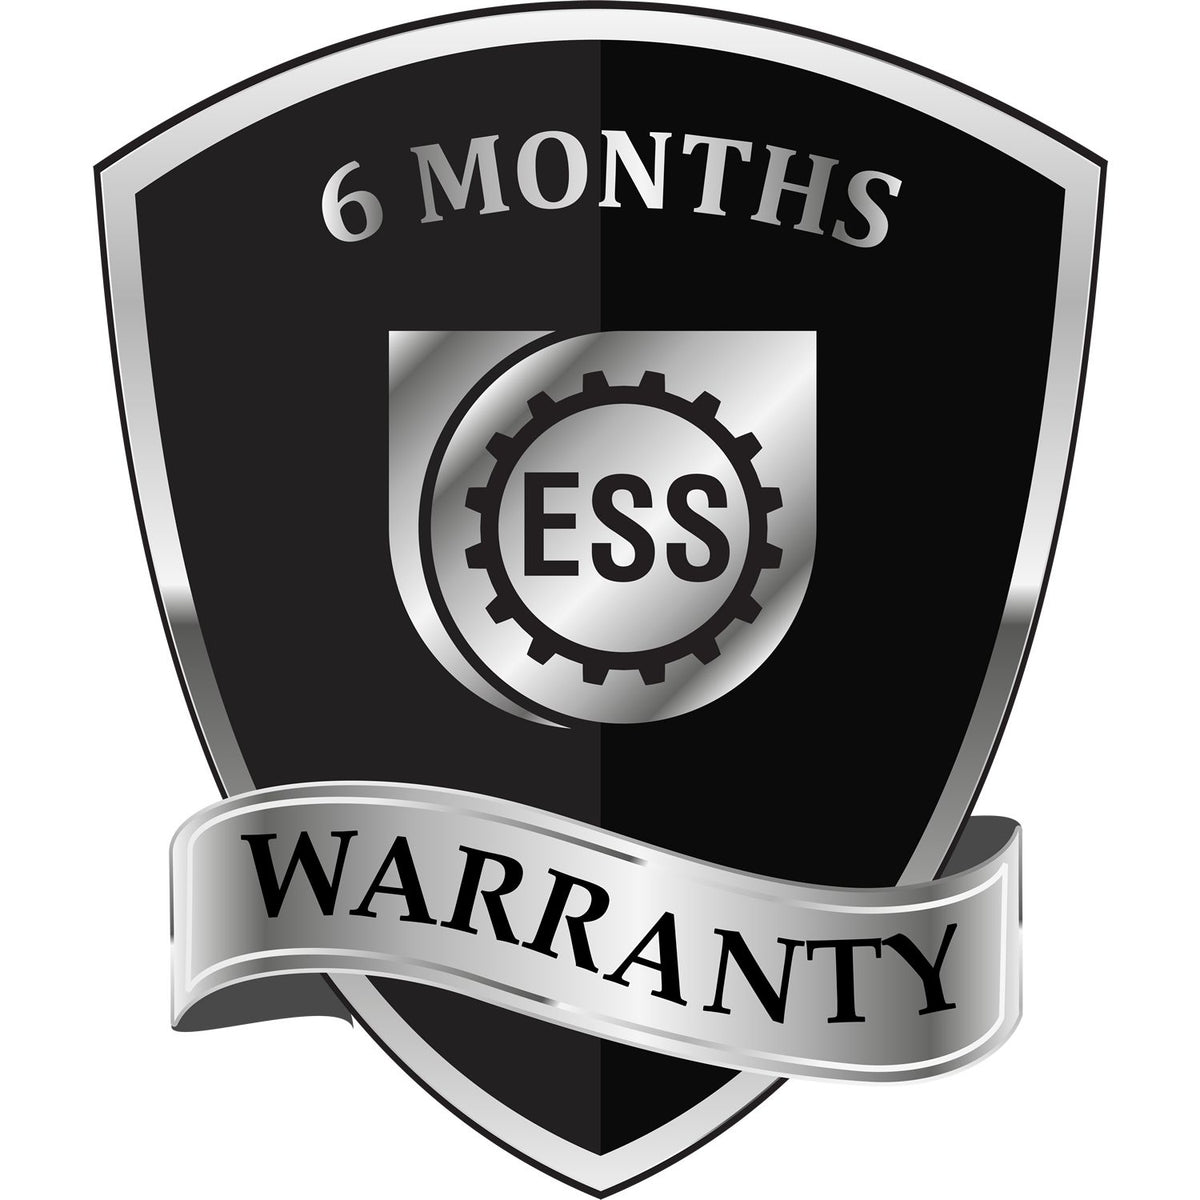 A badge or emblem showing a warranty icon for the Slim Pre-Inked Indiana Professional Engineer Seal Stamp